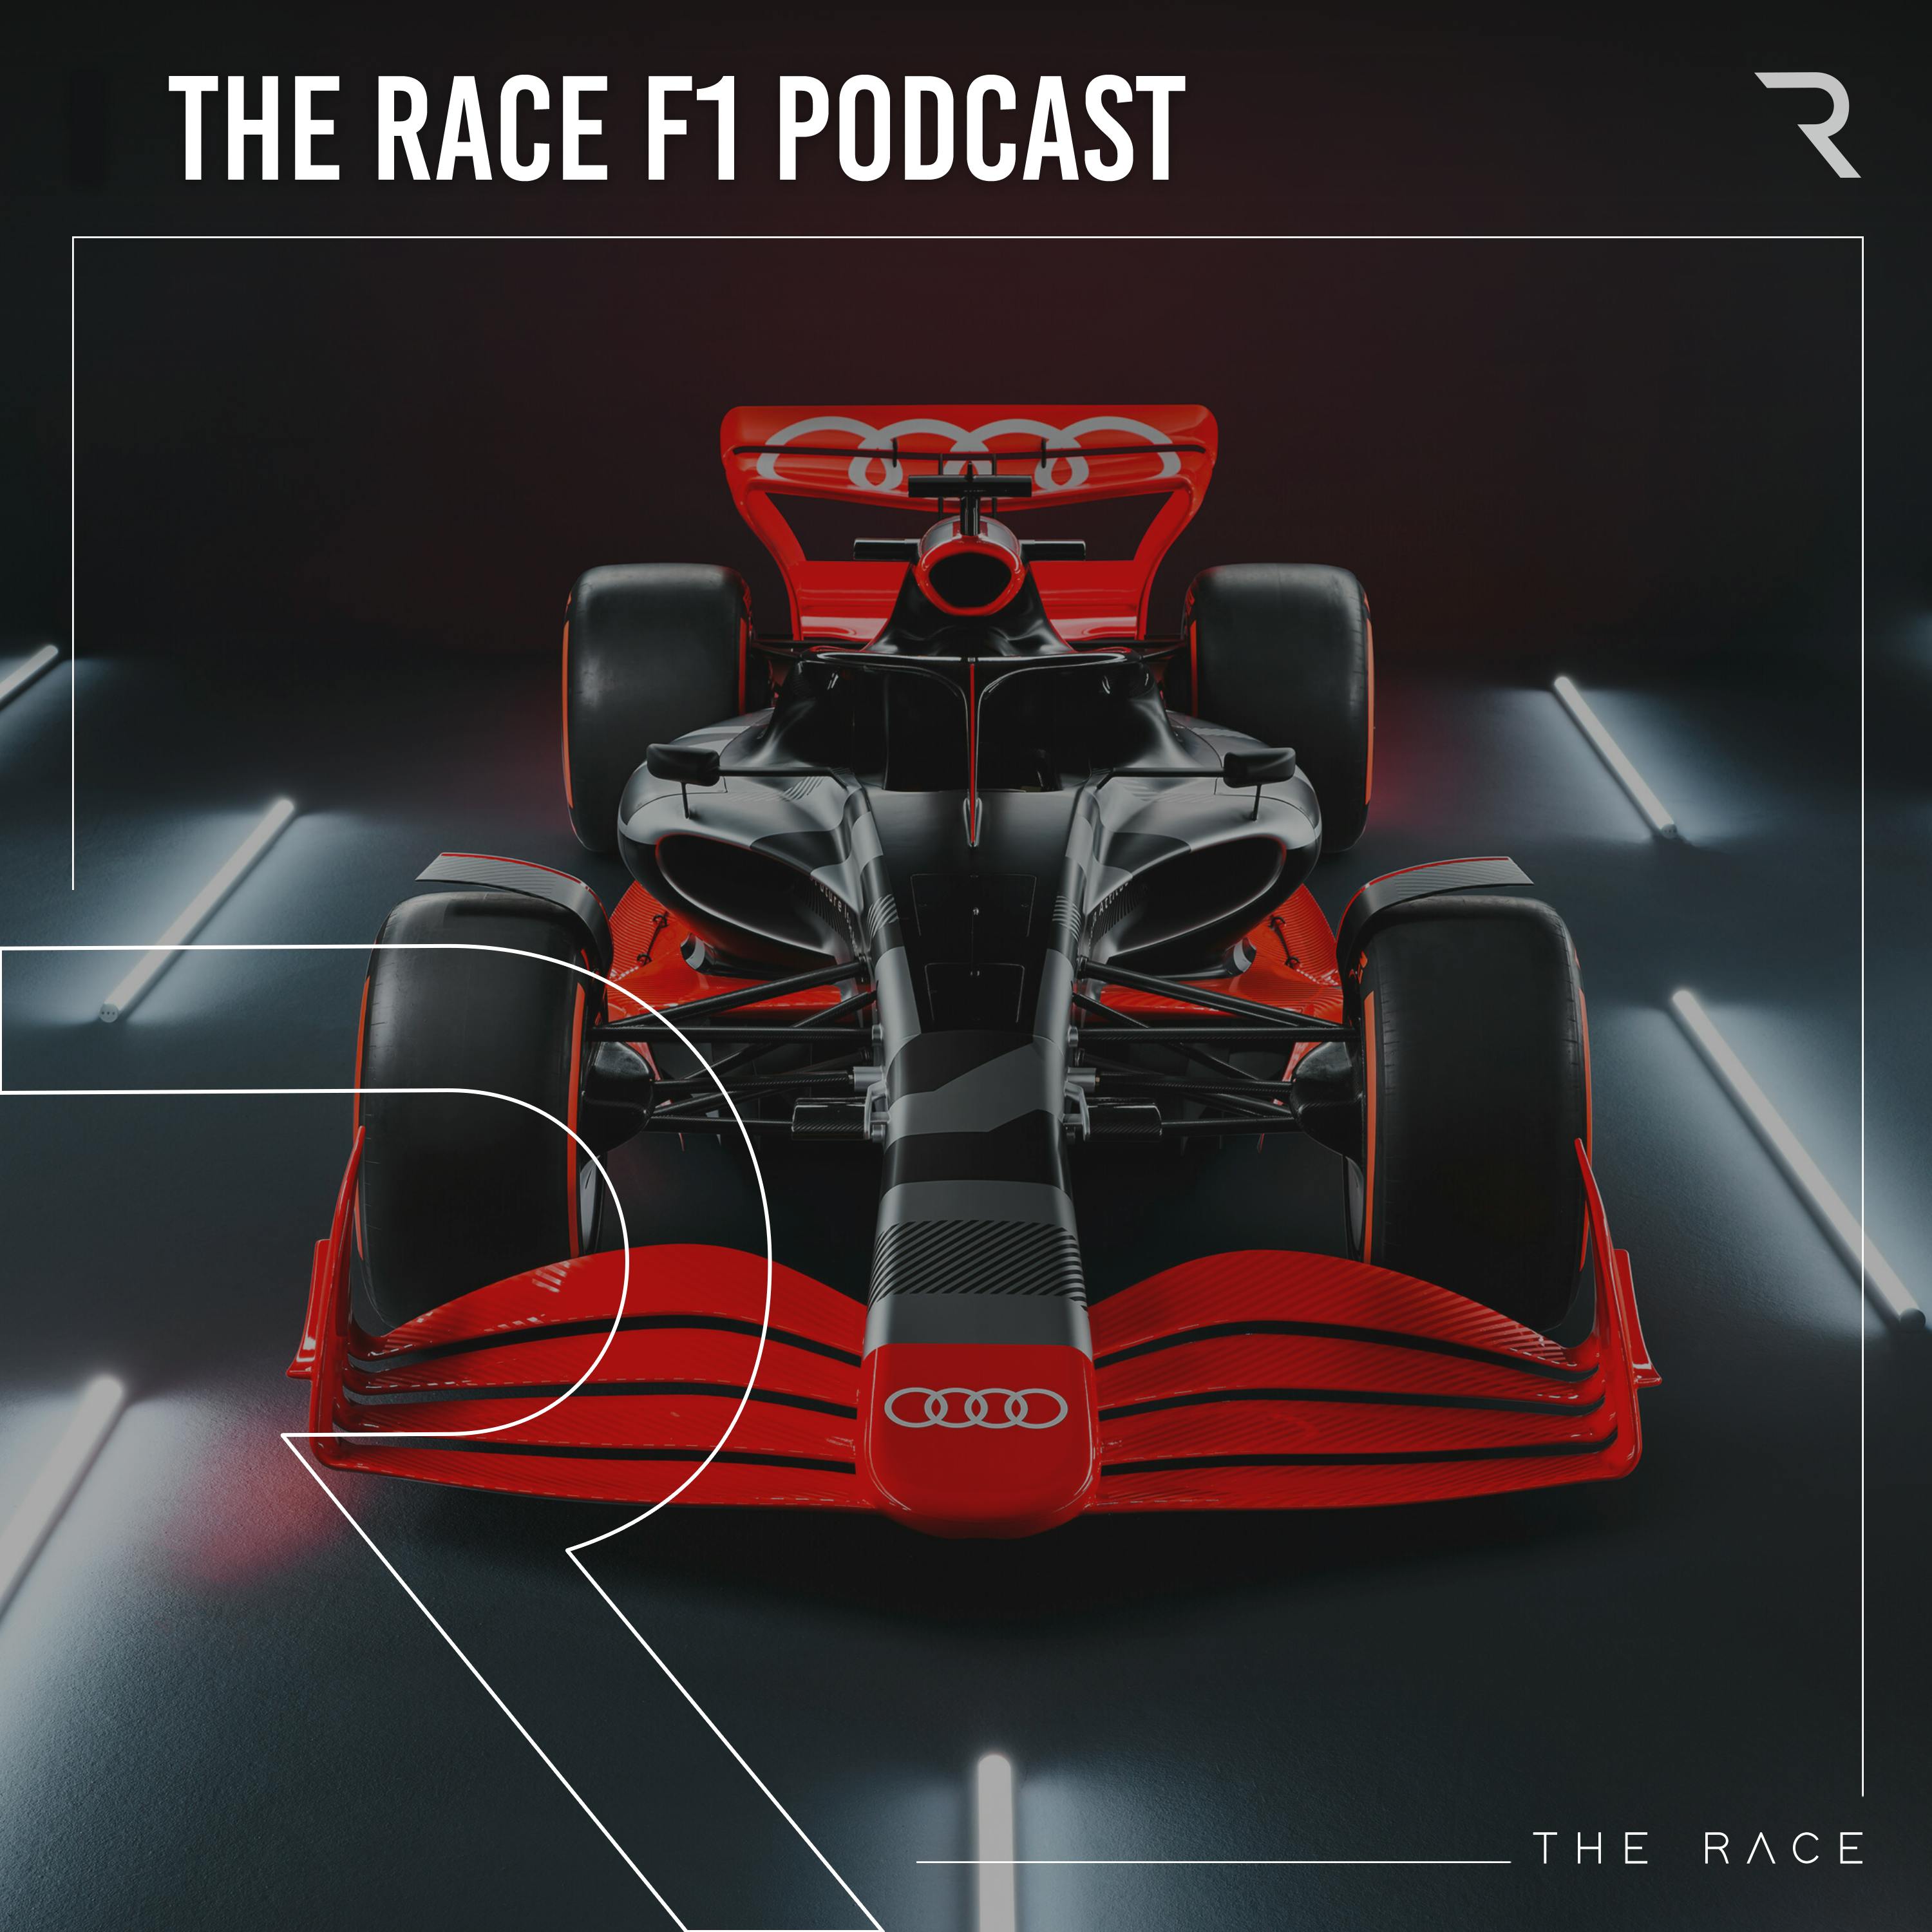 Audi announces F1 entry - the key questions answered